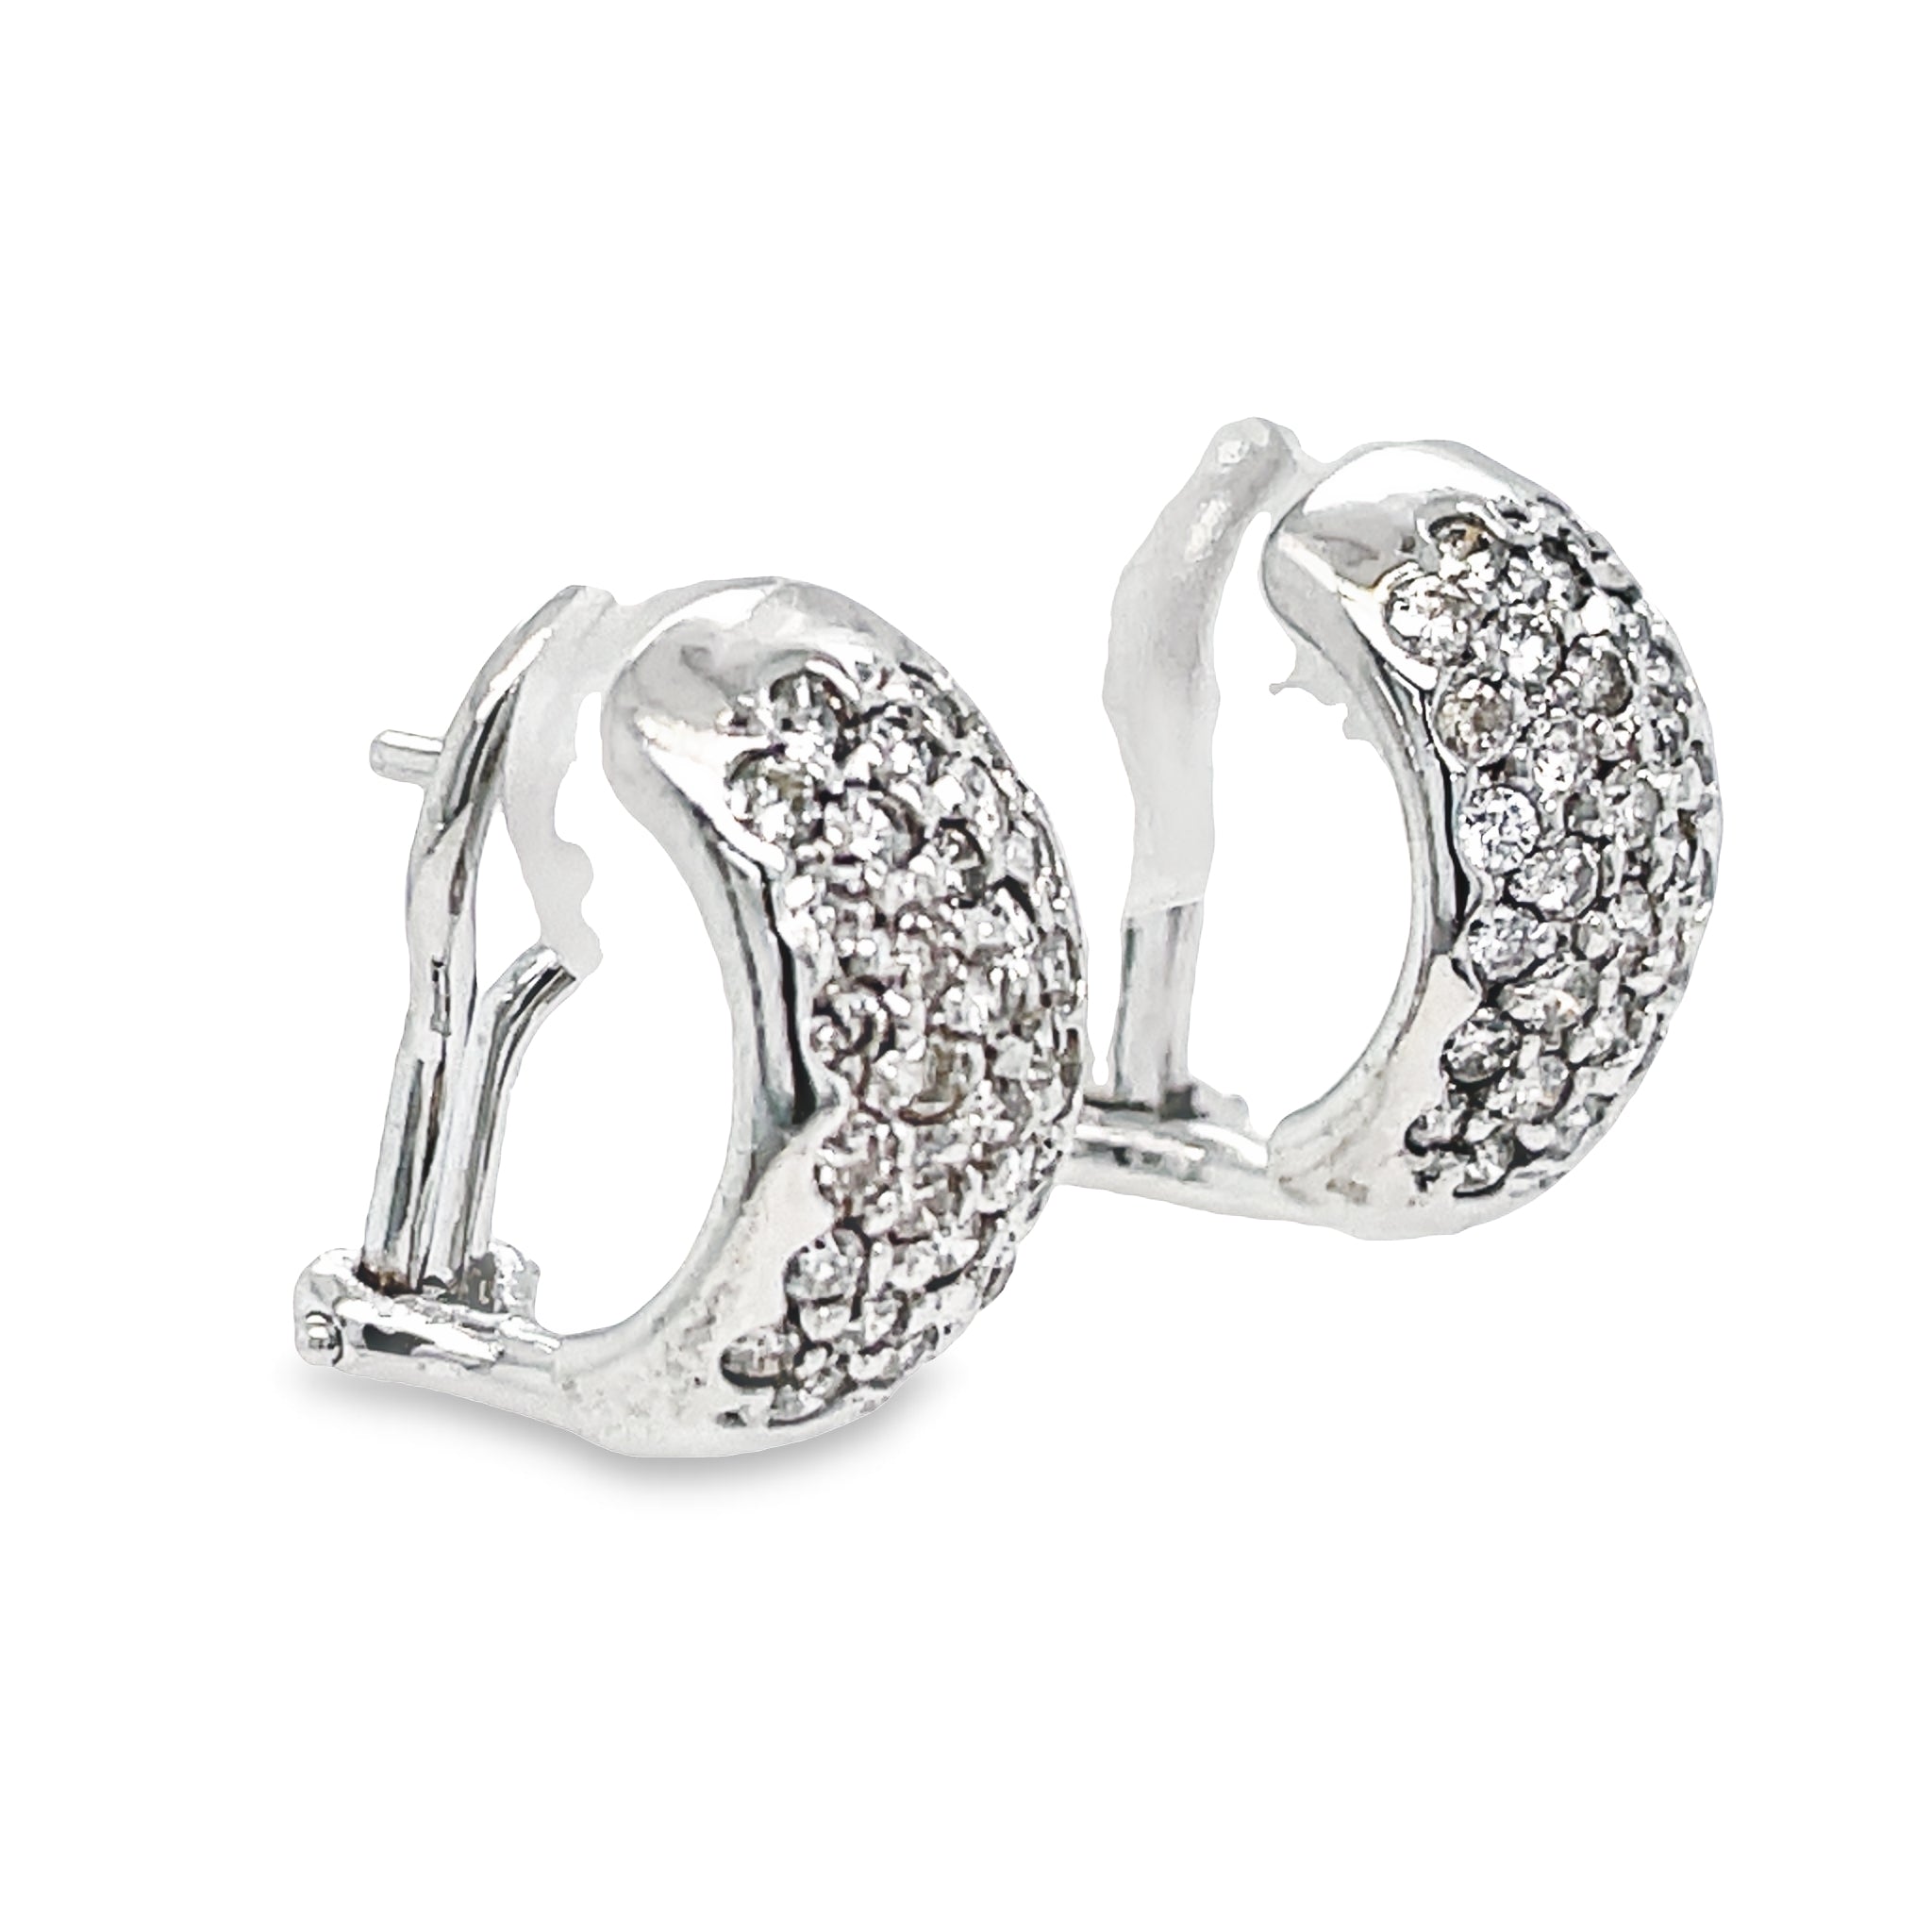 Add a touch of glamour to any outfit with our Pave Set Diamond Hoop Earrings! Made with 18k white gold and featuring a stunning diamond pave set totaling 1.40 cts, these earrings are the perfect choice for any stylish and elegant woman. The omega clip system ensures a secure and comfortable fit with every wear. Elevate your look and indulge in luxury with these exquisite earrings!